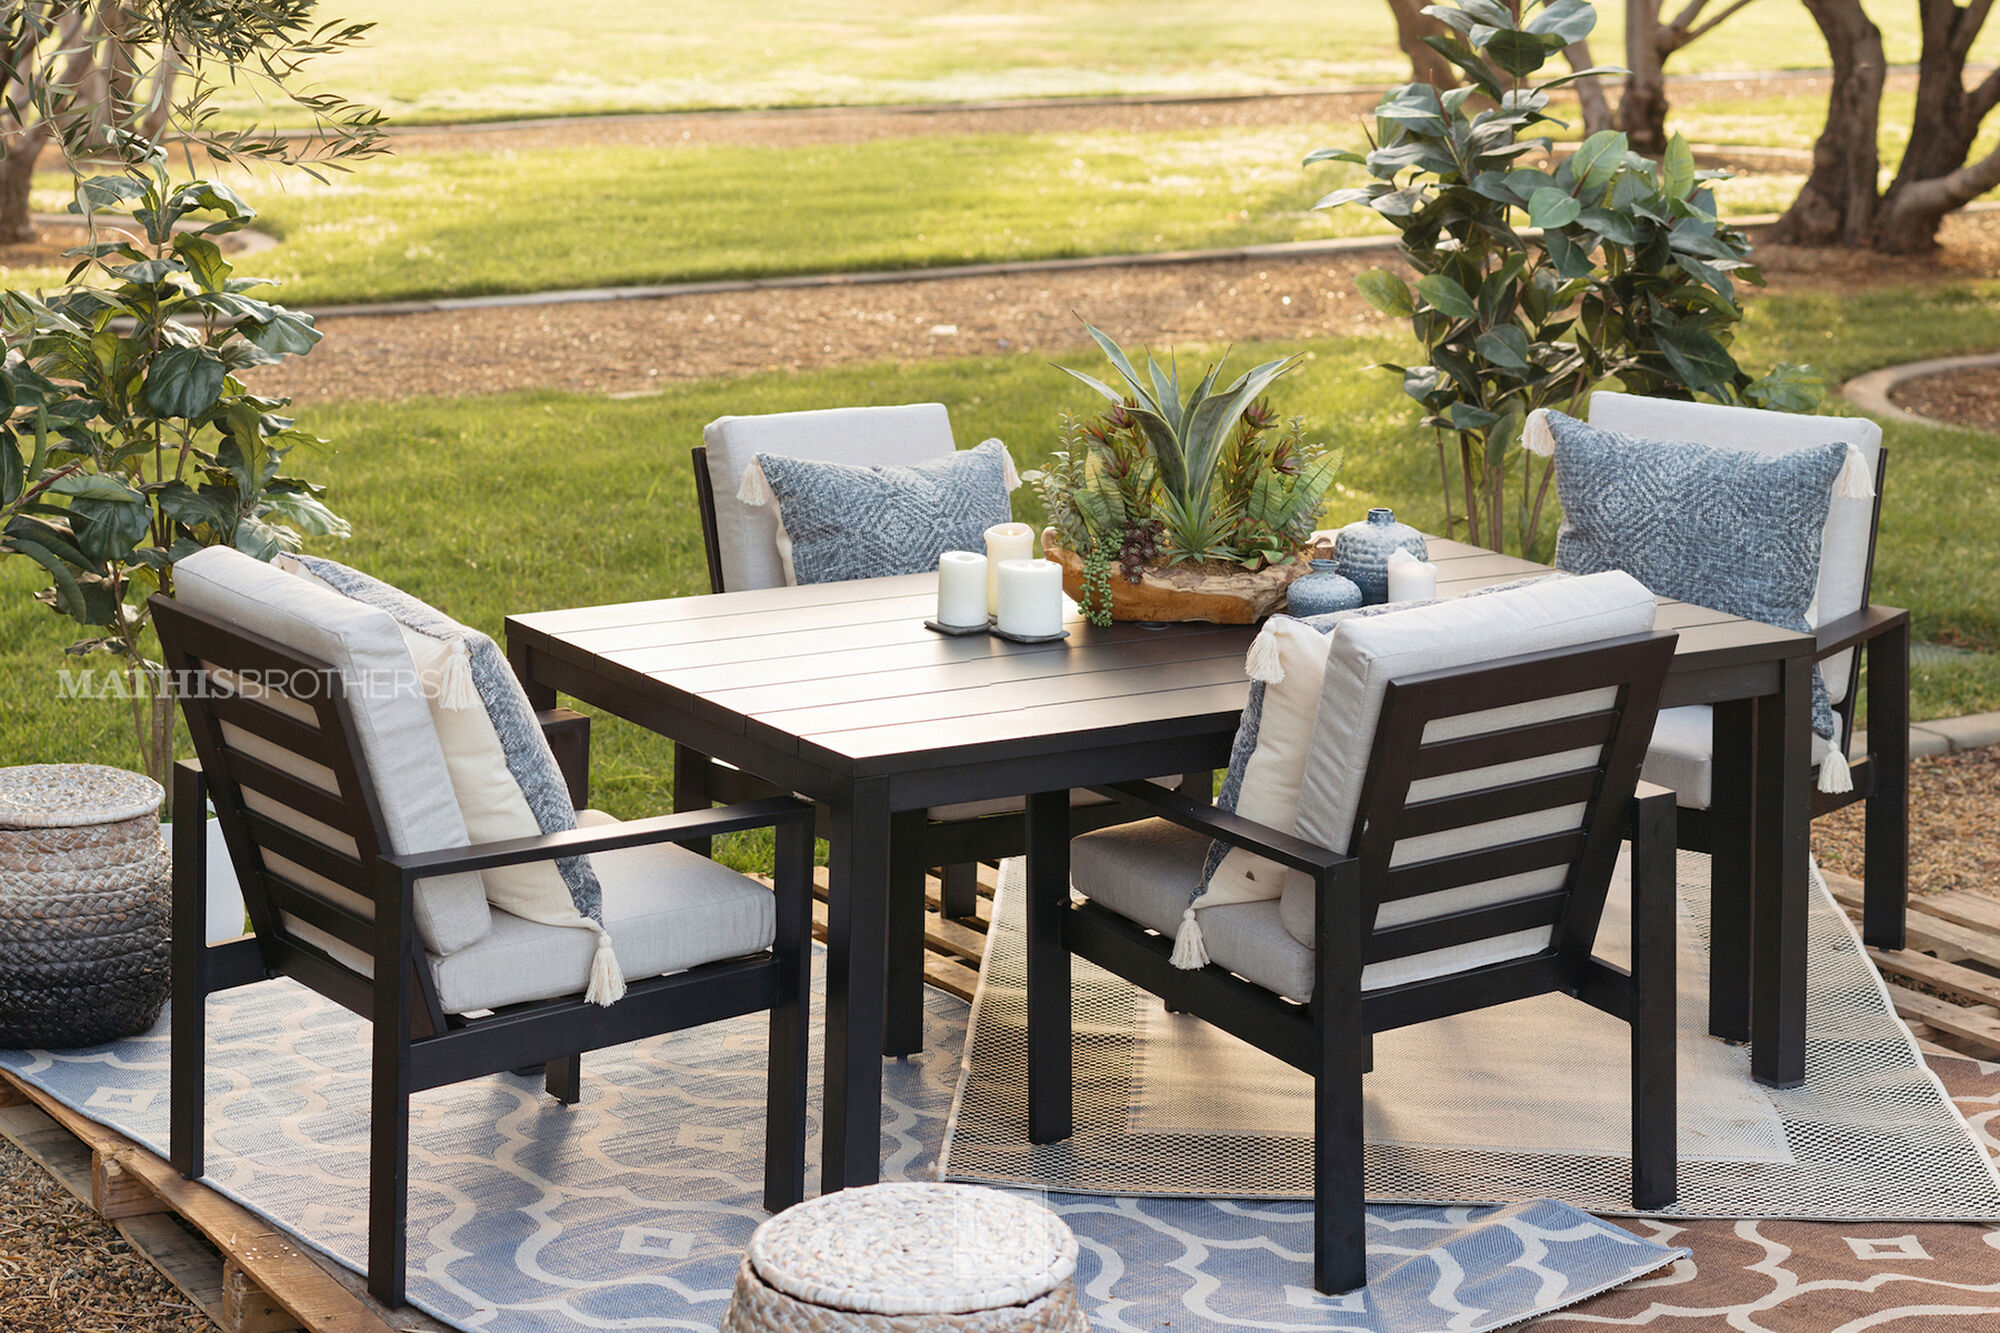 72" Modern Aluminum Patio Dining Table in Black | Mathis Brothers Furniture